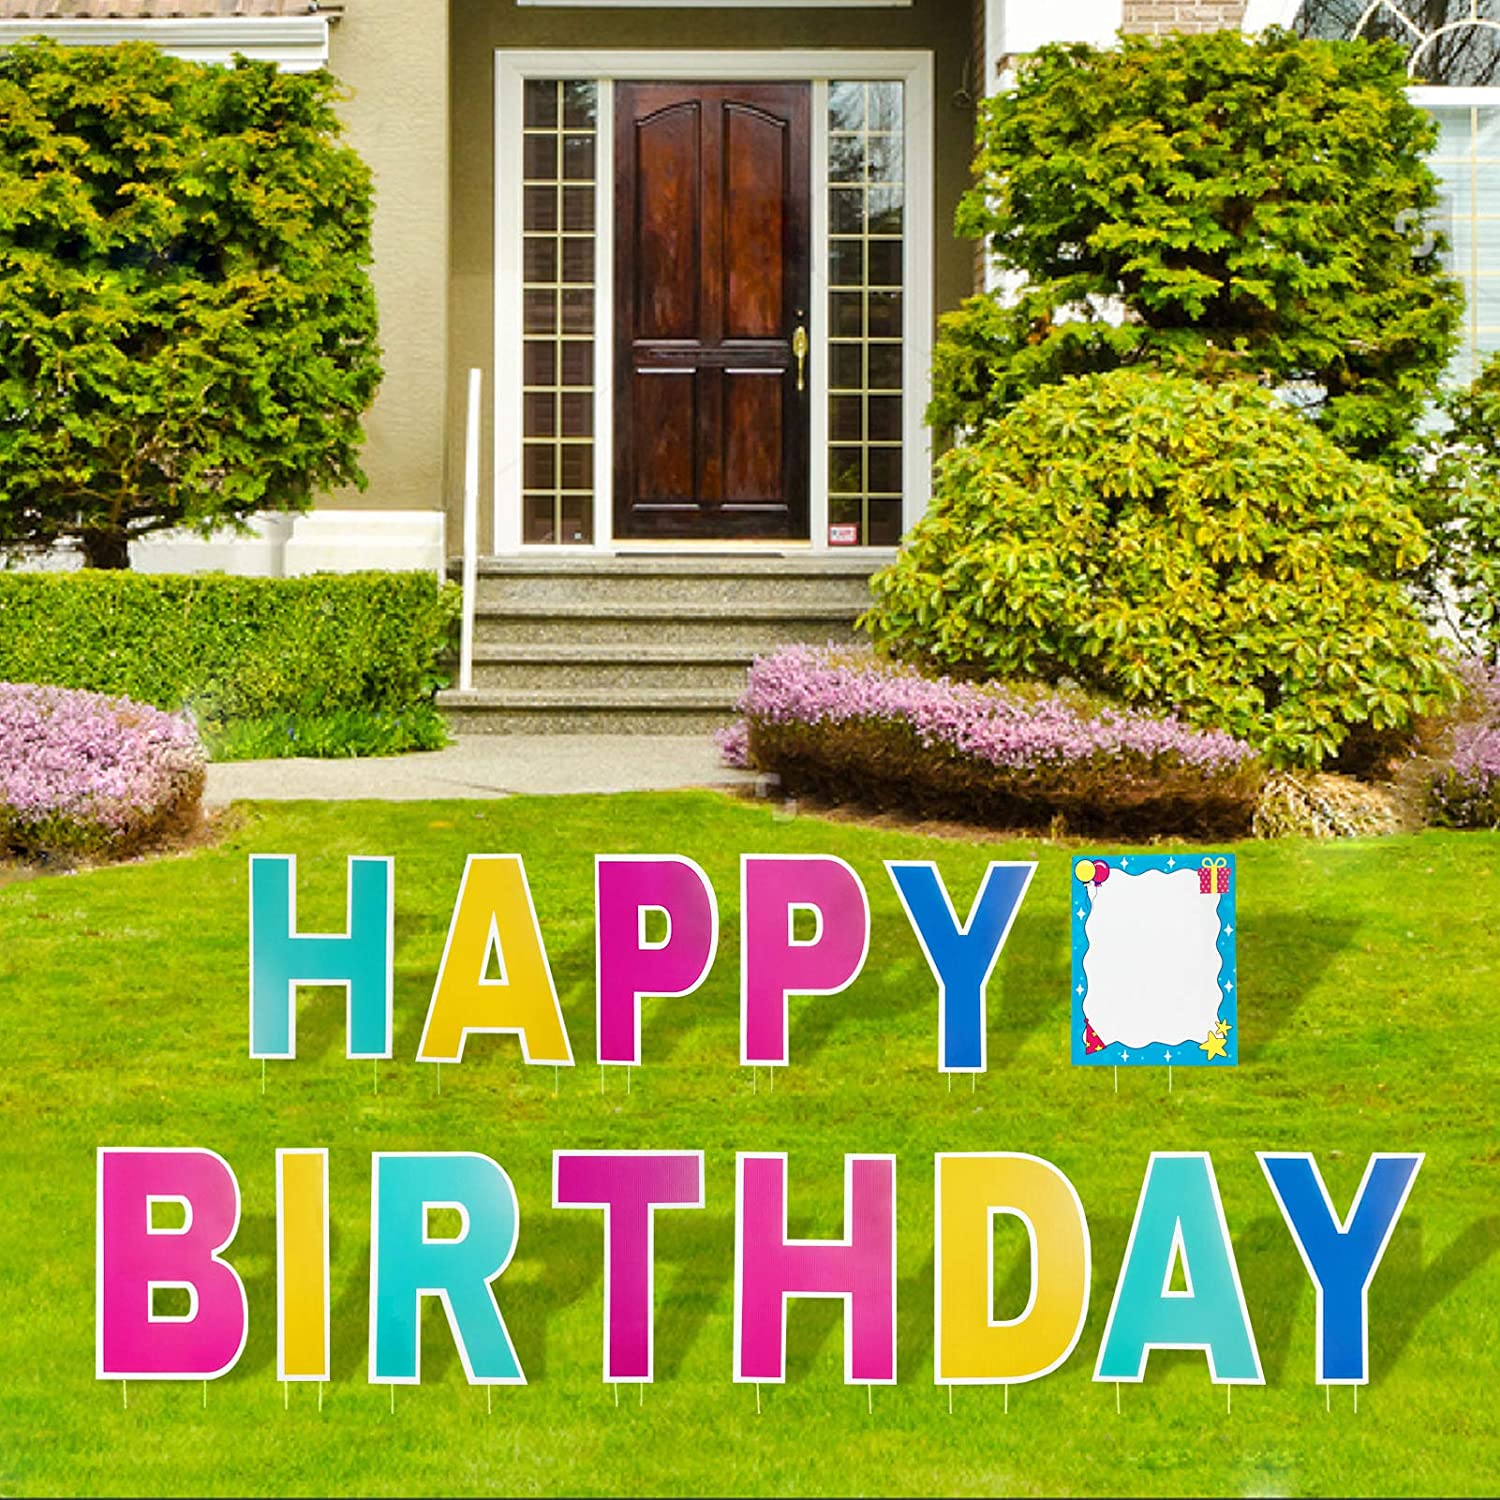 100% Original Factory Rustic Outdoor Garden Decor - Happy Birthday Yard Sign 16 Inch Birthday Letters Lawn Sign Colorful Birthday Yard Decoration with Stakes Cake Balloon Waterproof Garden Lawn De...